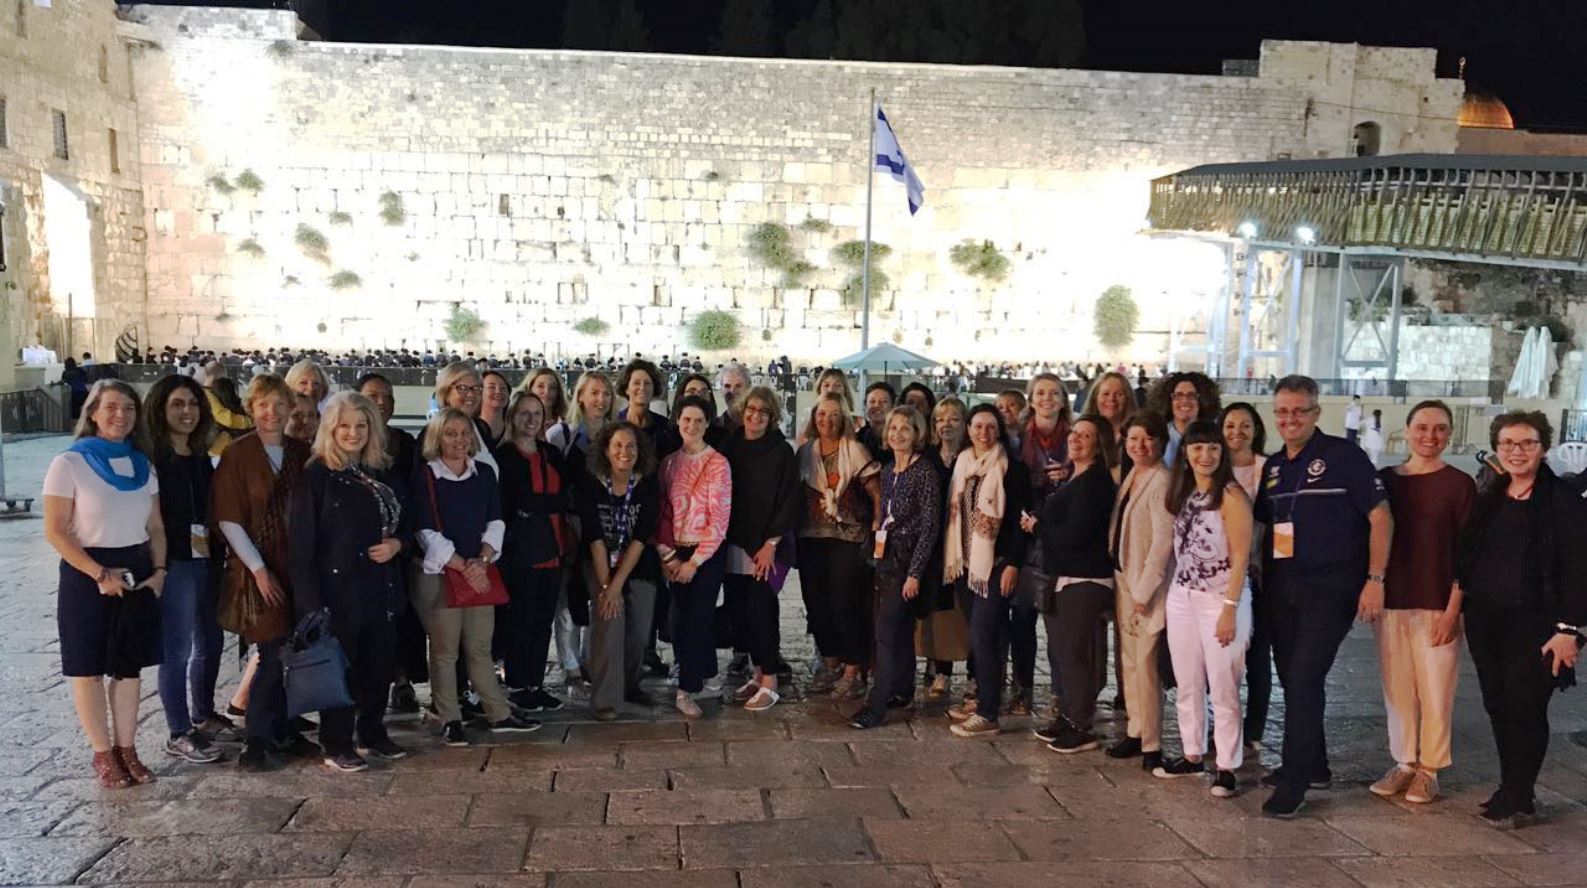 The Women Leaders trade mission to Israel sponsored by the Australia Israel Chamber of Commerce, June 2017. Photo: courtesy